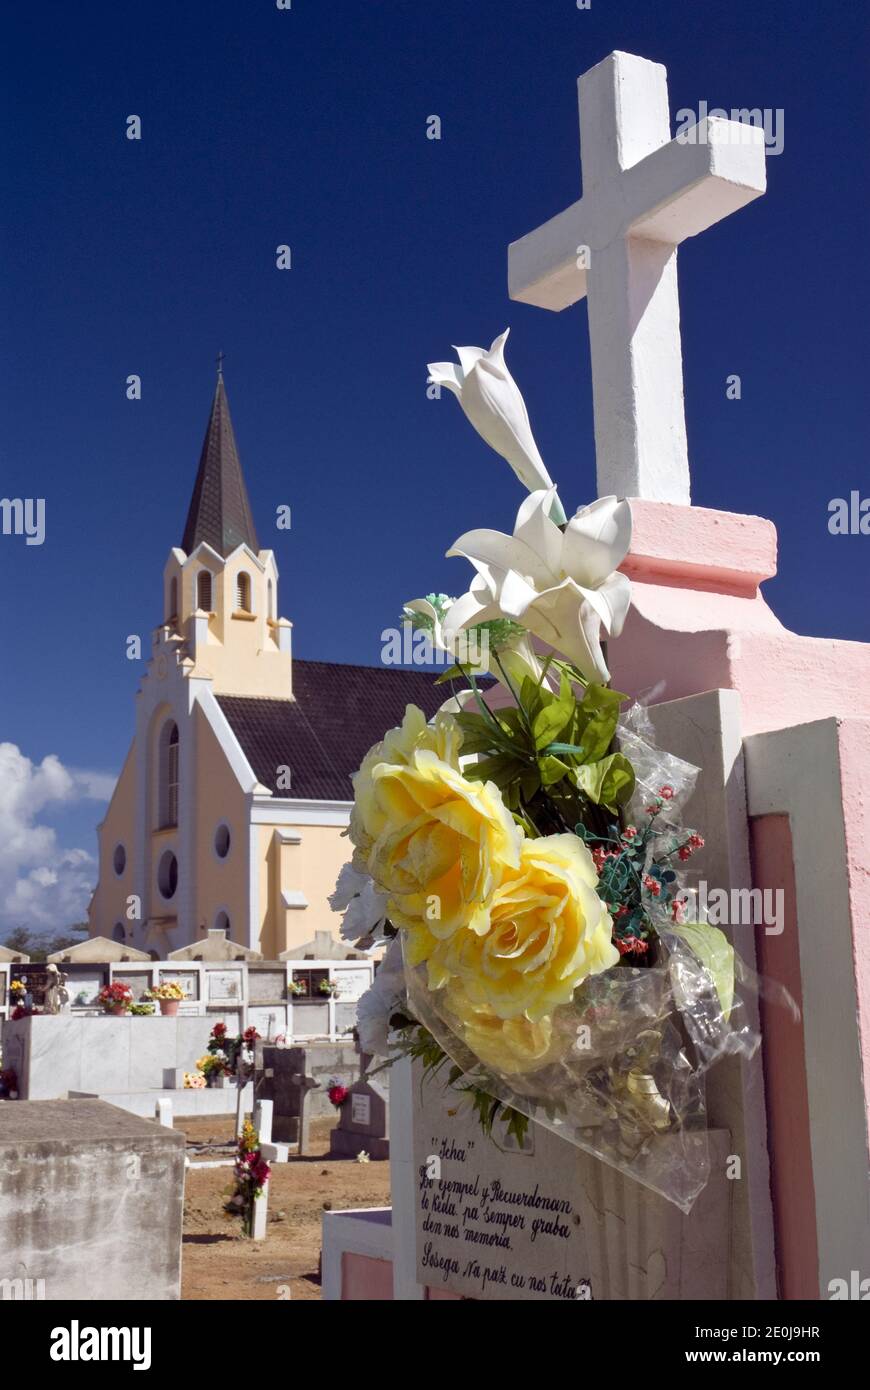 Flowers decorate crypts in the cemetery next to the historic and colorful St. Anna's Catholic Church, Noord, Aruba. Stock Photo